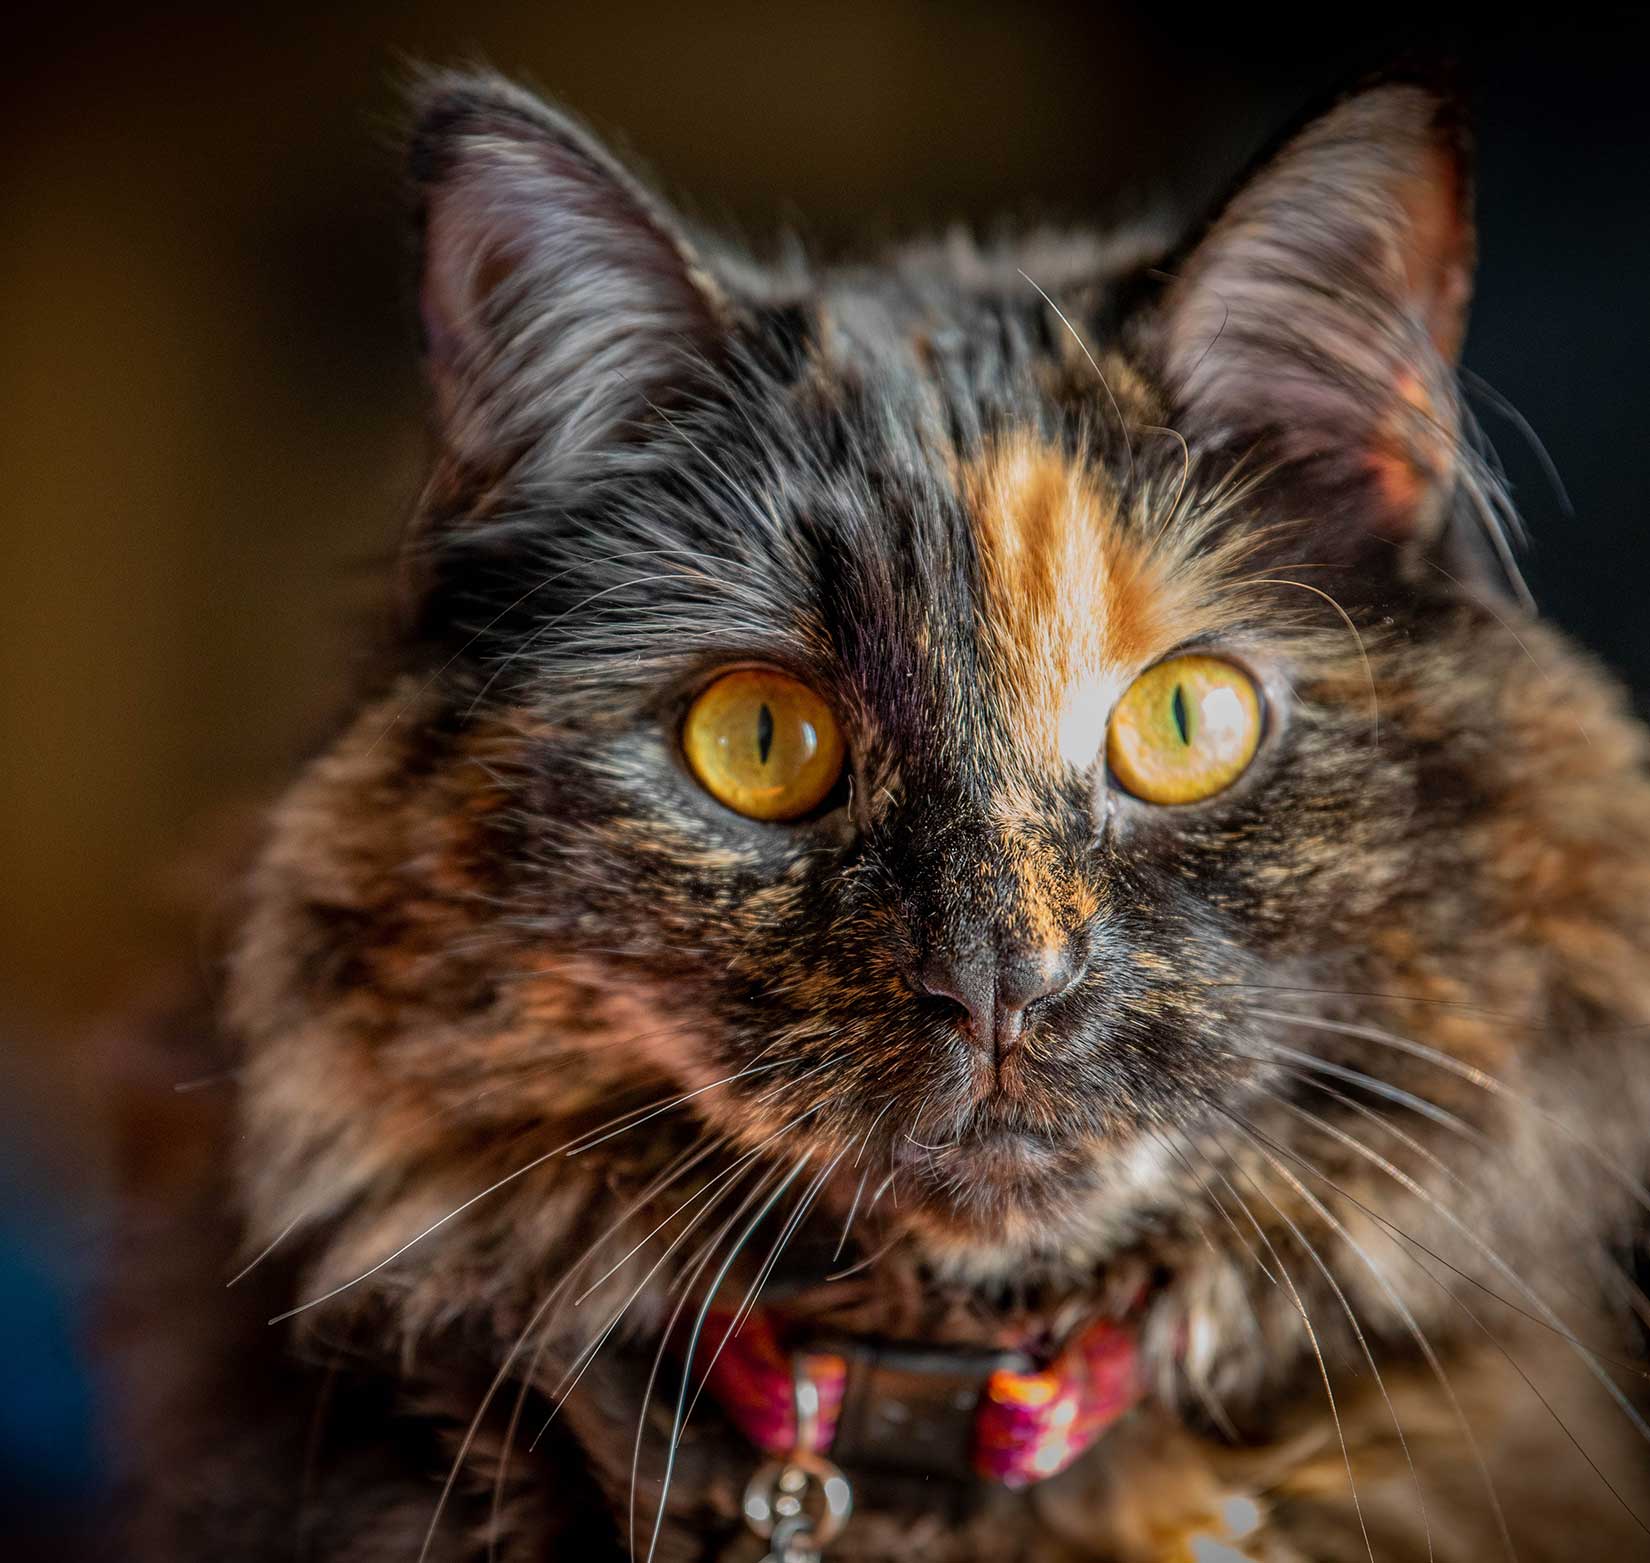 A professional portrait of an orange and black cat with orange eyes